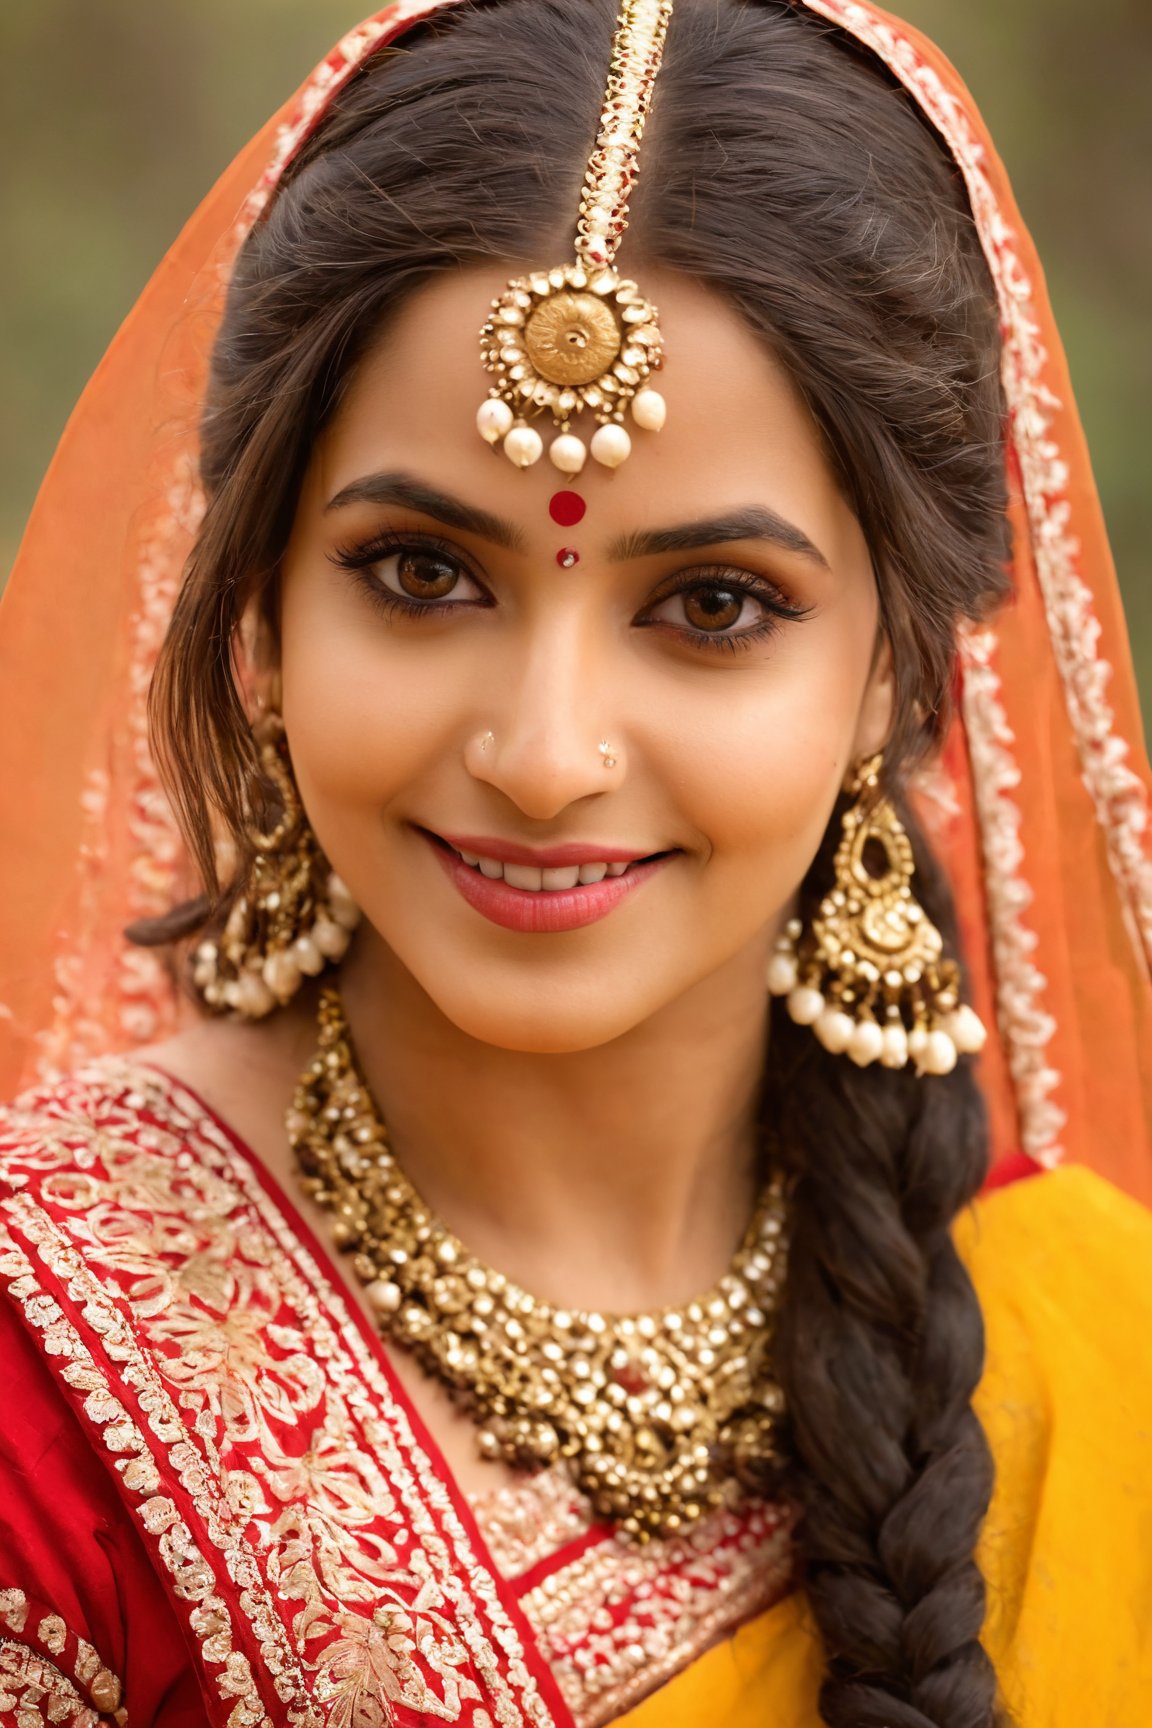 (best quality,4k,8k,highres,masterpiece:1.2),ultra-detailed,(realistic,photorealistic,photo-realistic:1.37),indian woman,beautiful detailed eyes,detailed nose,beautiful detailed lips,long black hair,brown skin,vibrant colors,natural lighting,outdoor background,portrait,traditional clothing,ornate jewelry,serene expression,soft breeze,graceful pose,Cultural elements,fine brush strokes,traditional indian patterns,harmonious color palette,feminine beauty,subtle smile,colored holi powders,dreamy atmosphere,foliage as backdrop,natural sunlight streaming,ethereal glow,exquisite detailing,her gaze speaks volumes,rich cultural heritage,daintily painted fingers,intricate mehendi patterns,sunset hues,radiant and confident,delicate features,red bindi,expressive eyes,midsummer festival attire,a riot of colors,pure and graceful